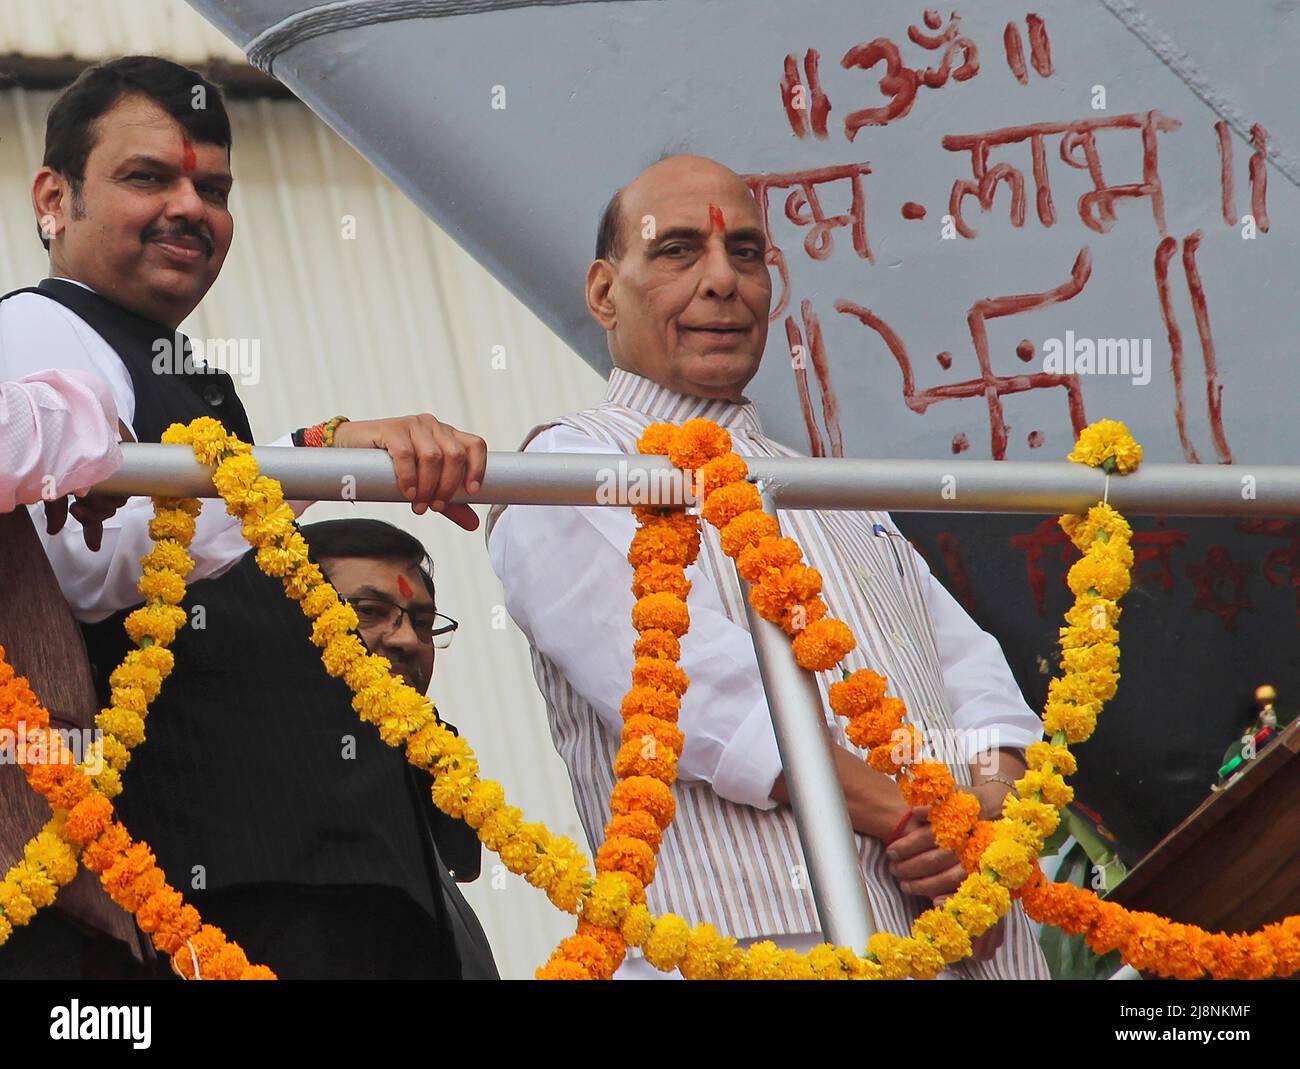 Mumbai, India. 17th May, 2022. L-R Bharatiya Janata Party (BJP) Leader of Opposition in Maharashtra Legislative Assembly, Devendra Fadnavis and Indian Defence Minister Rajnath Singh are seen at the launch of second advanced stealth frigate warship of P17A class at Mazagon Dock Shipbuilders Limited (MDL) in Mumbai. The warship 'Udaygiri' was launched by Indian Defence Minister Rajnath Singh who was the chief guest at the event. (Photo by Ashish Vaishnav/SOPA Images/Sipa USA) Credit: Sipa USA/Alamy Live News Stock Photo